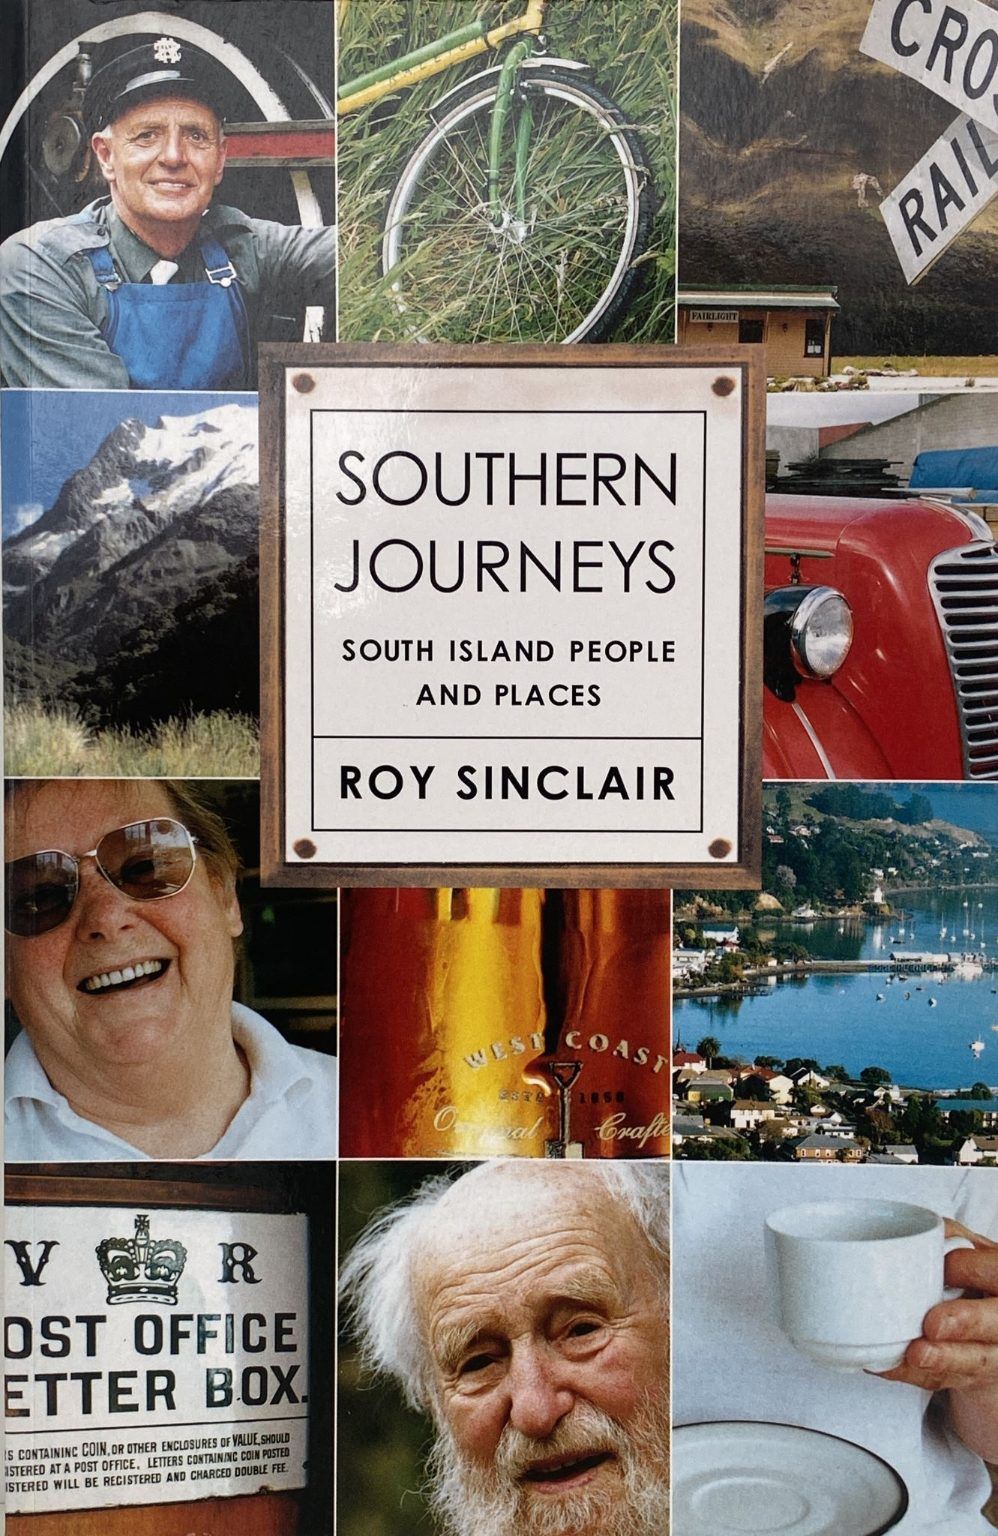 SOUTHERN JOURNEYS: South Island People and Places